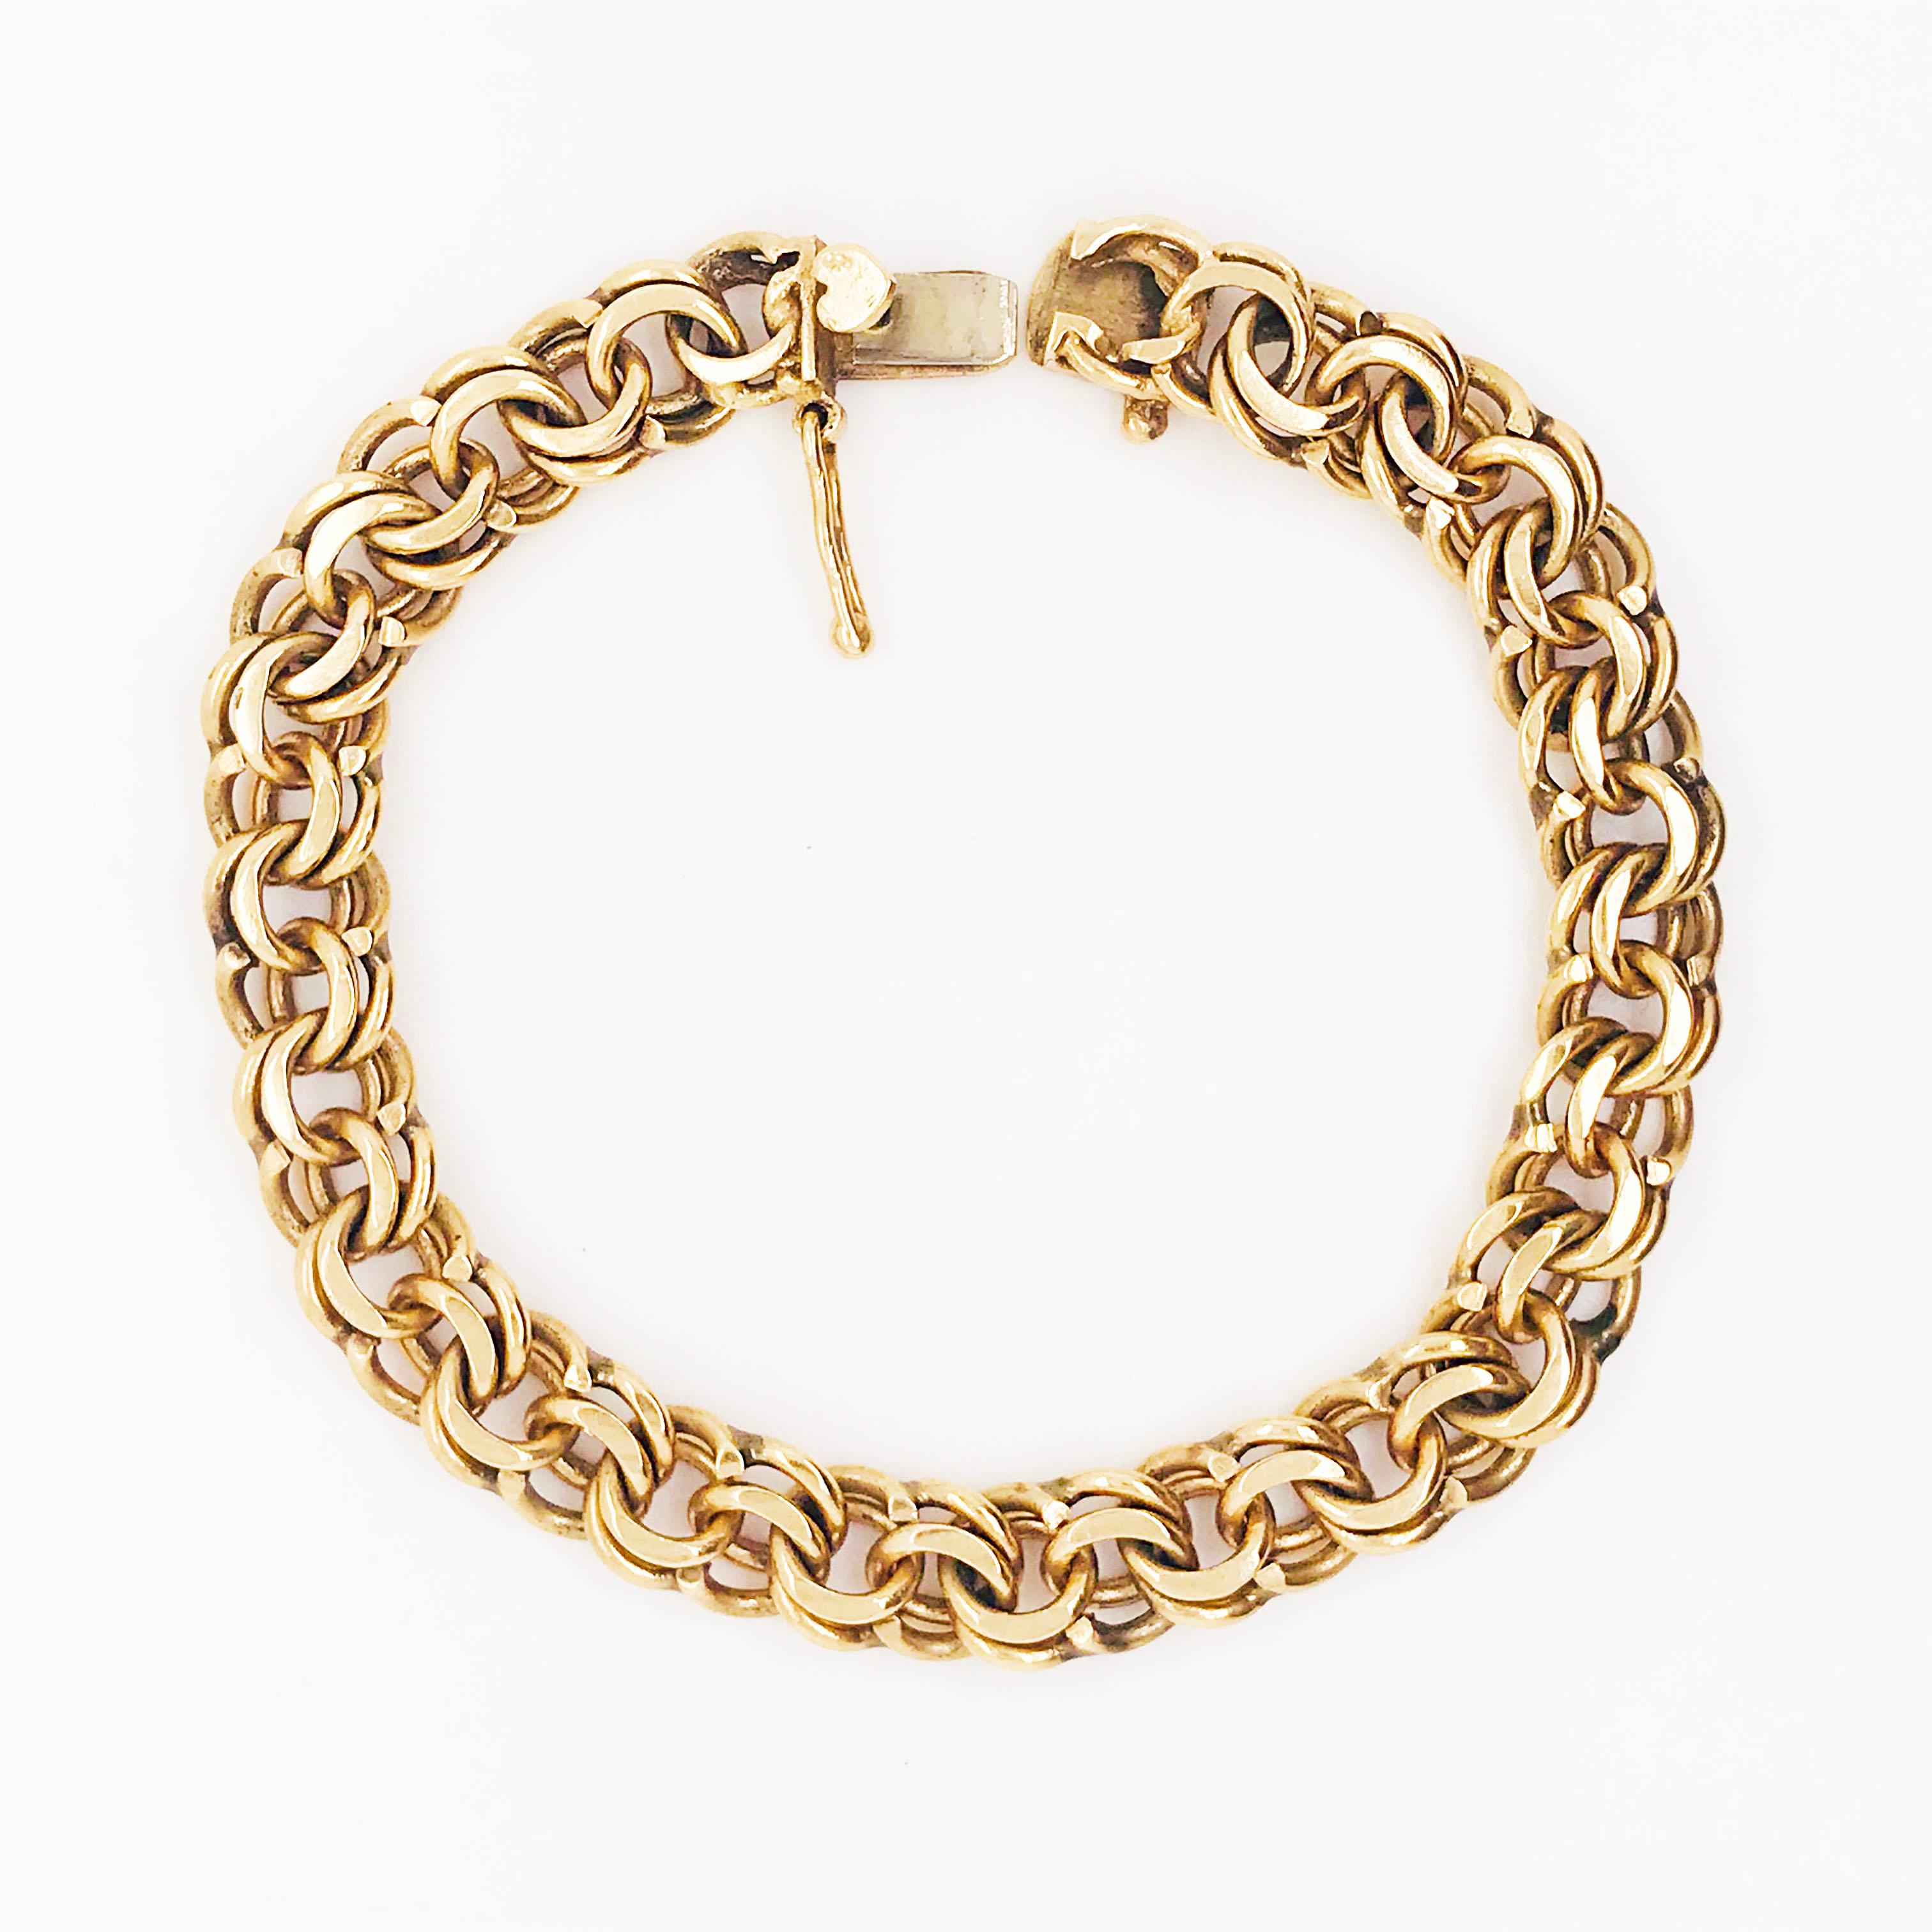 This 14 karat yellow gold charm bracelet is so RETRO!  Originating from Rhode Island, this charm bracelet was designs so that you can wear the extra large charms on it! These are the charms that are large enough to wear as pendants!  Today, a woman